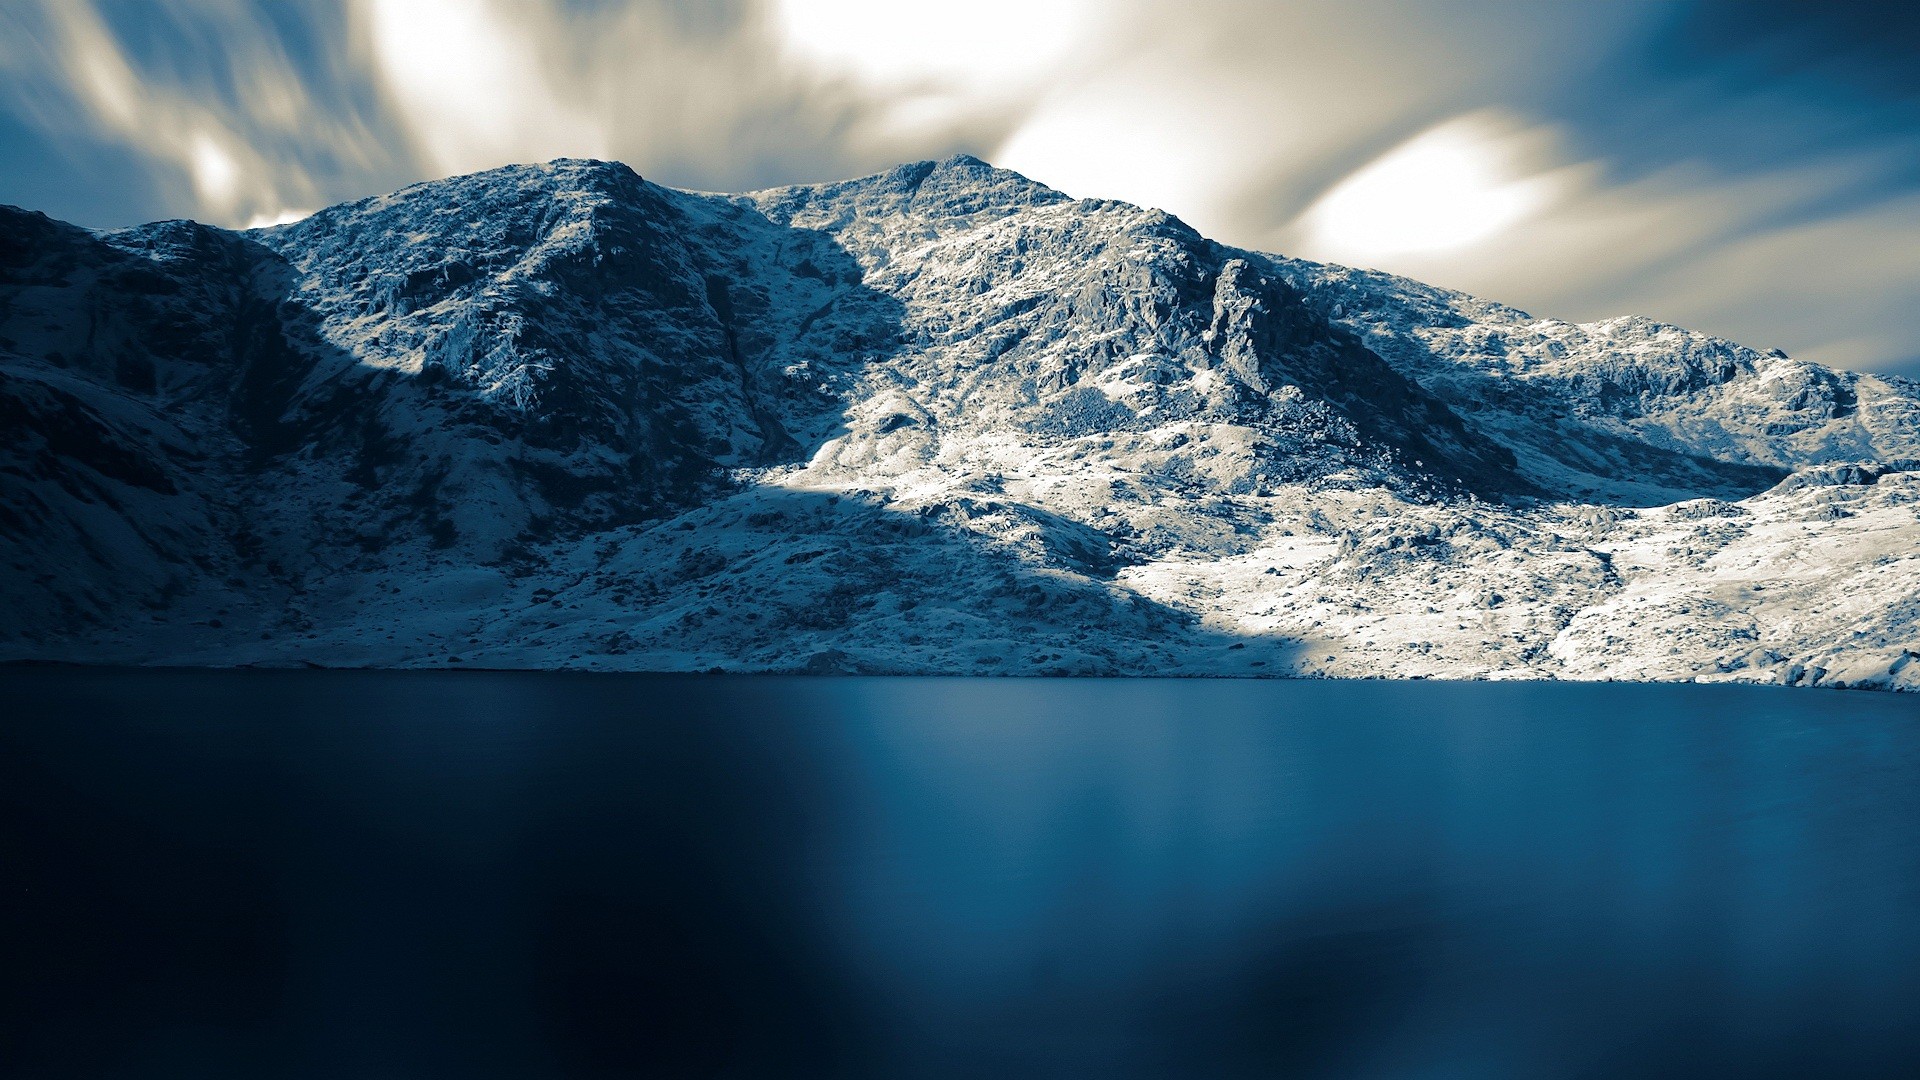 General 1920x1080 landscape mountains snow water nature